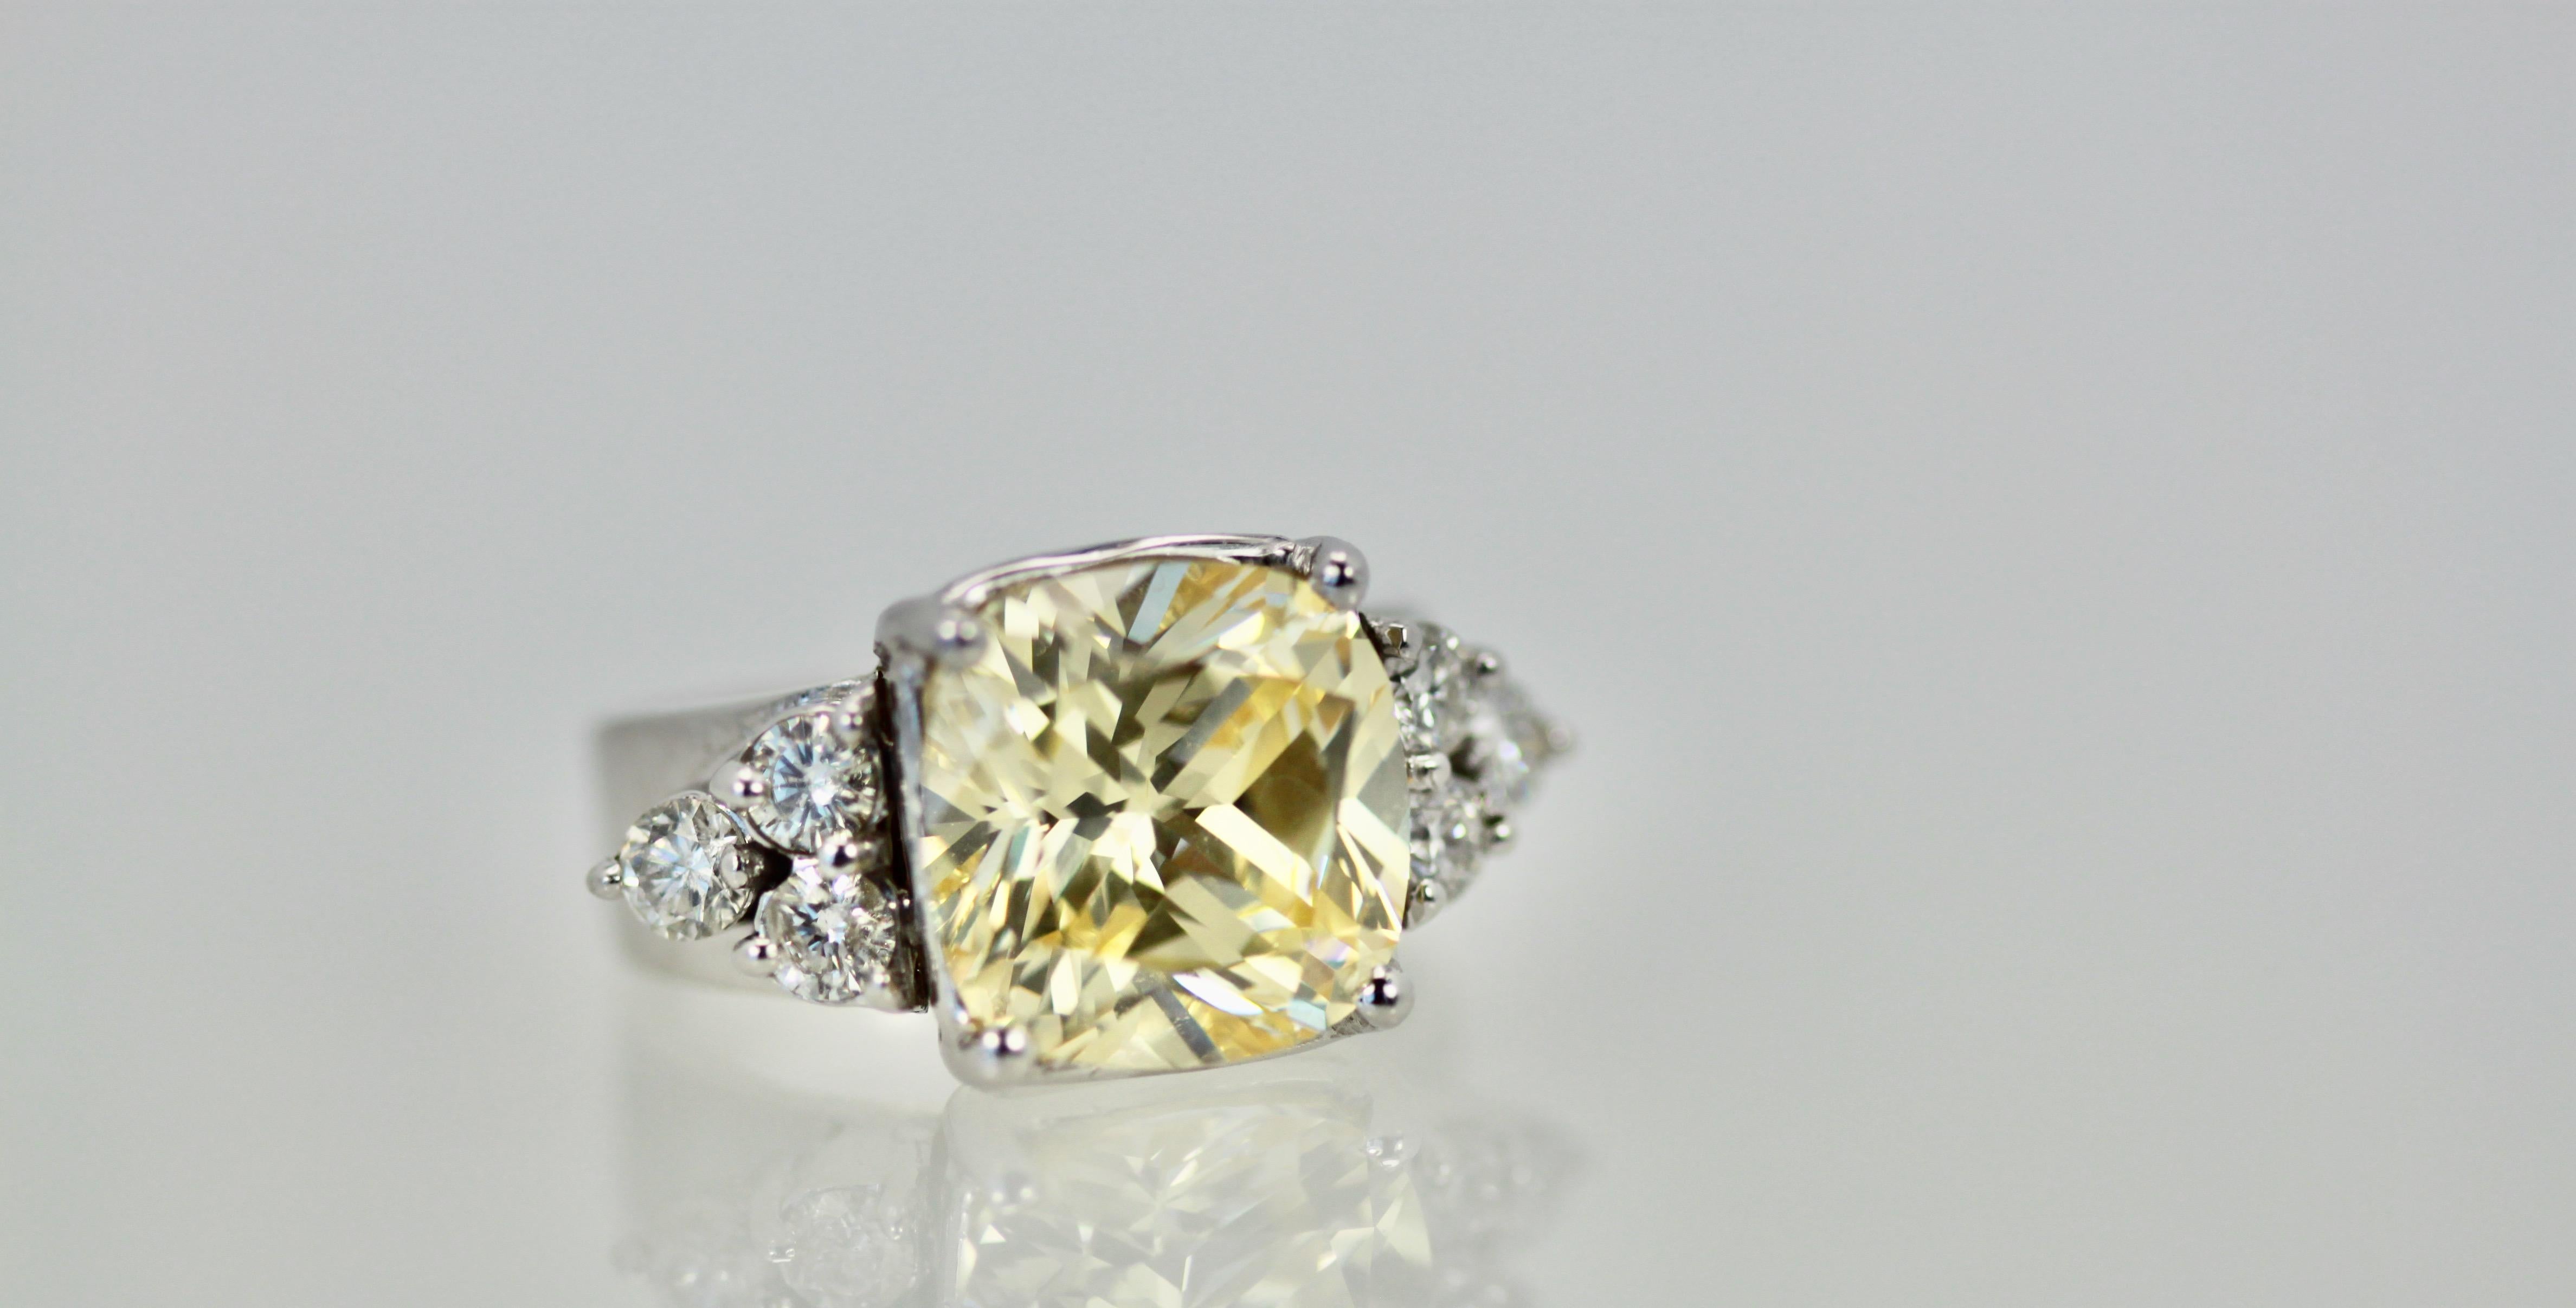 Large Yellow Sapphire Ring with Diamond Side Accents 5